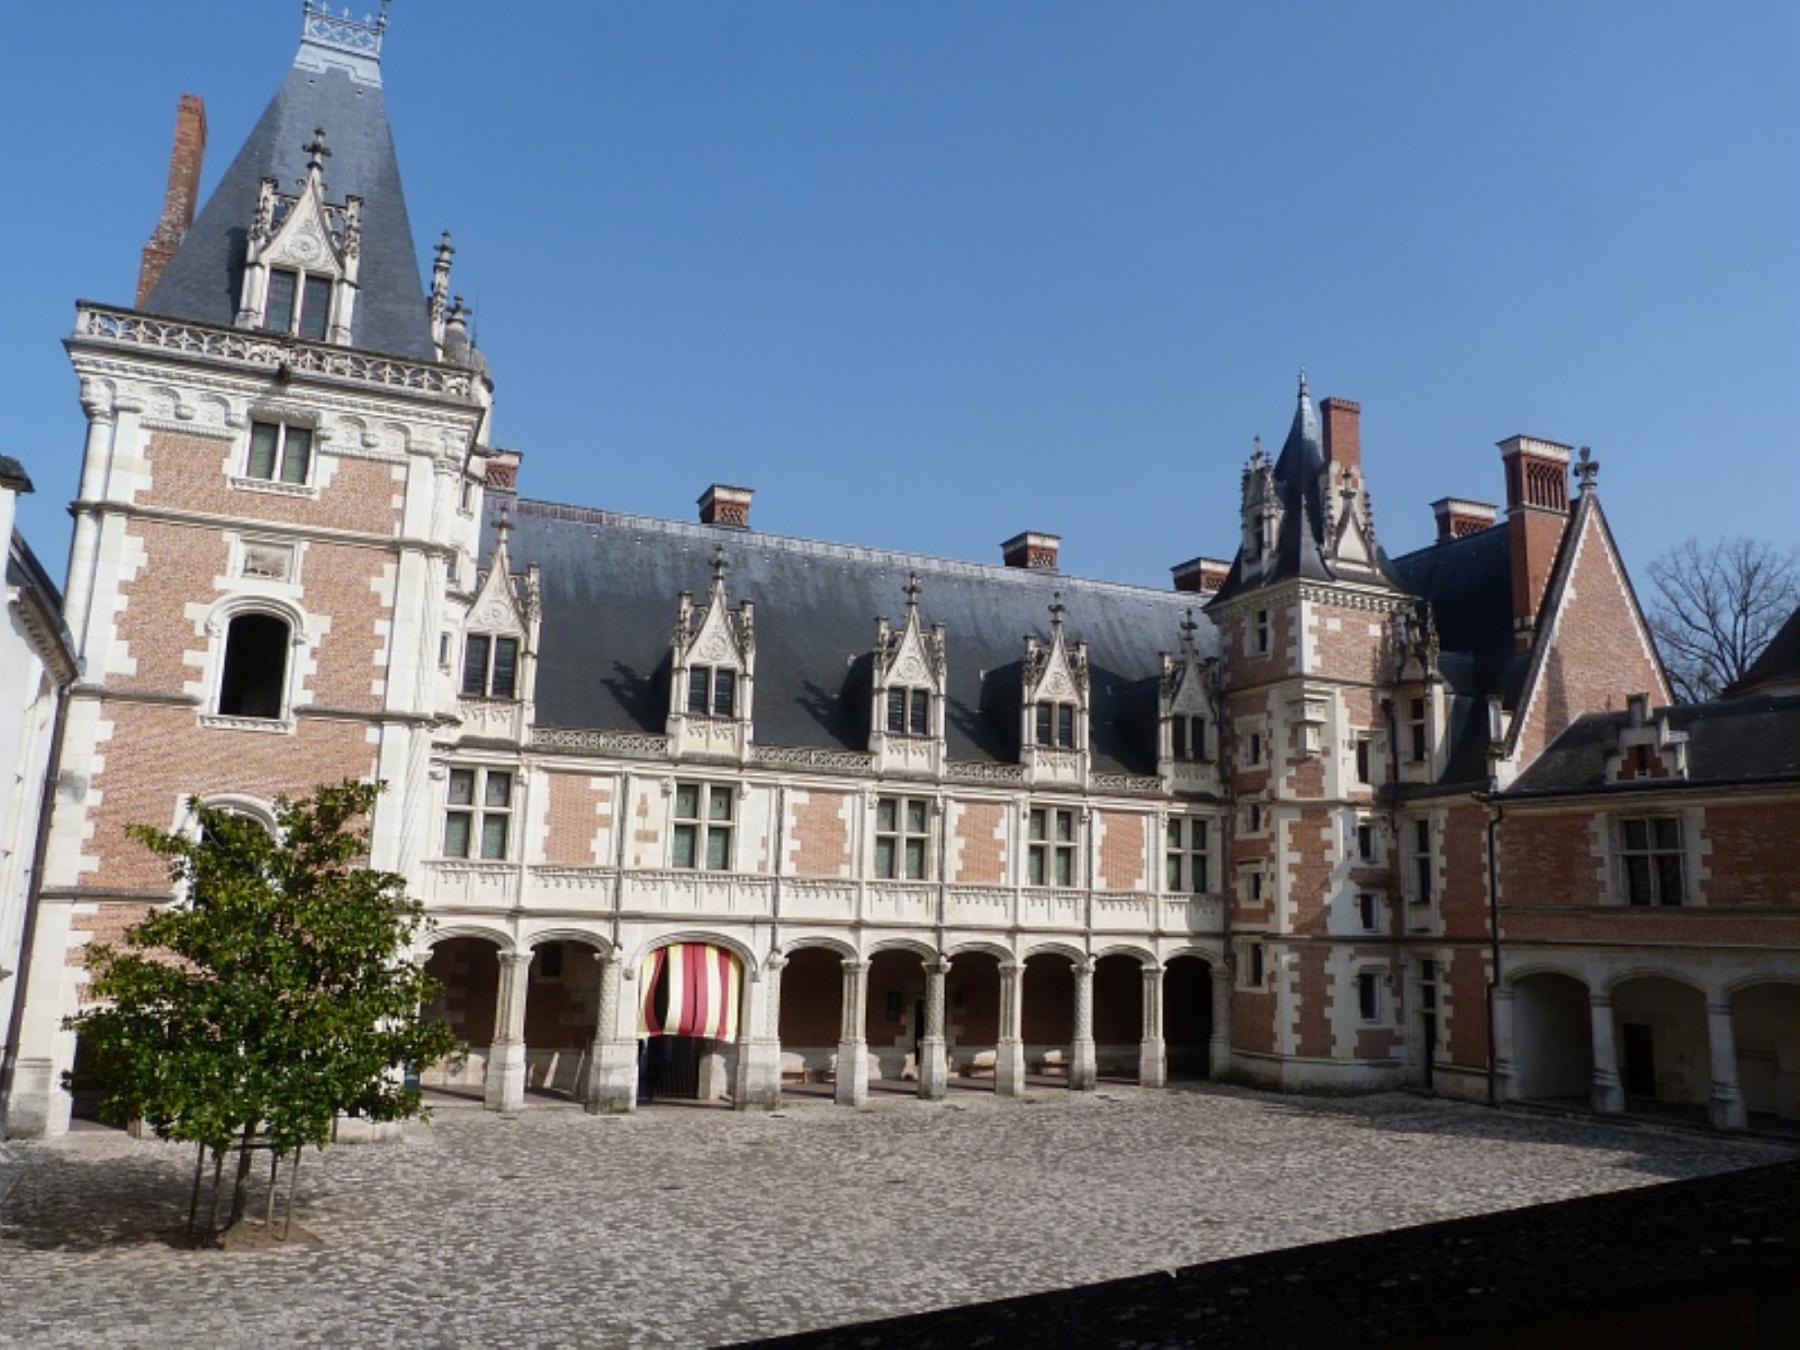 Tickets-Chateaux  Tickets for - Blois + Chambord